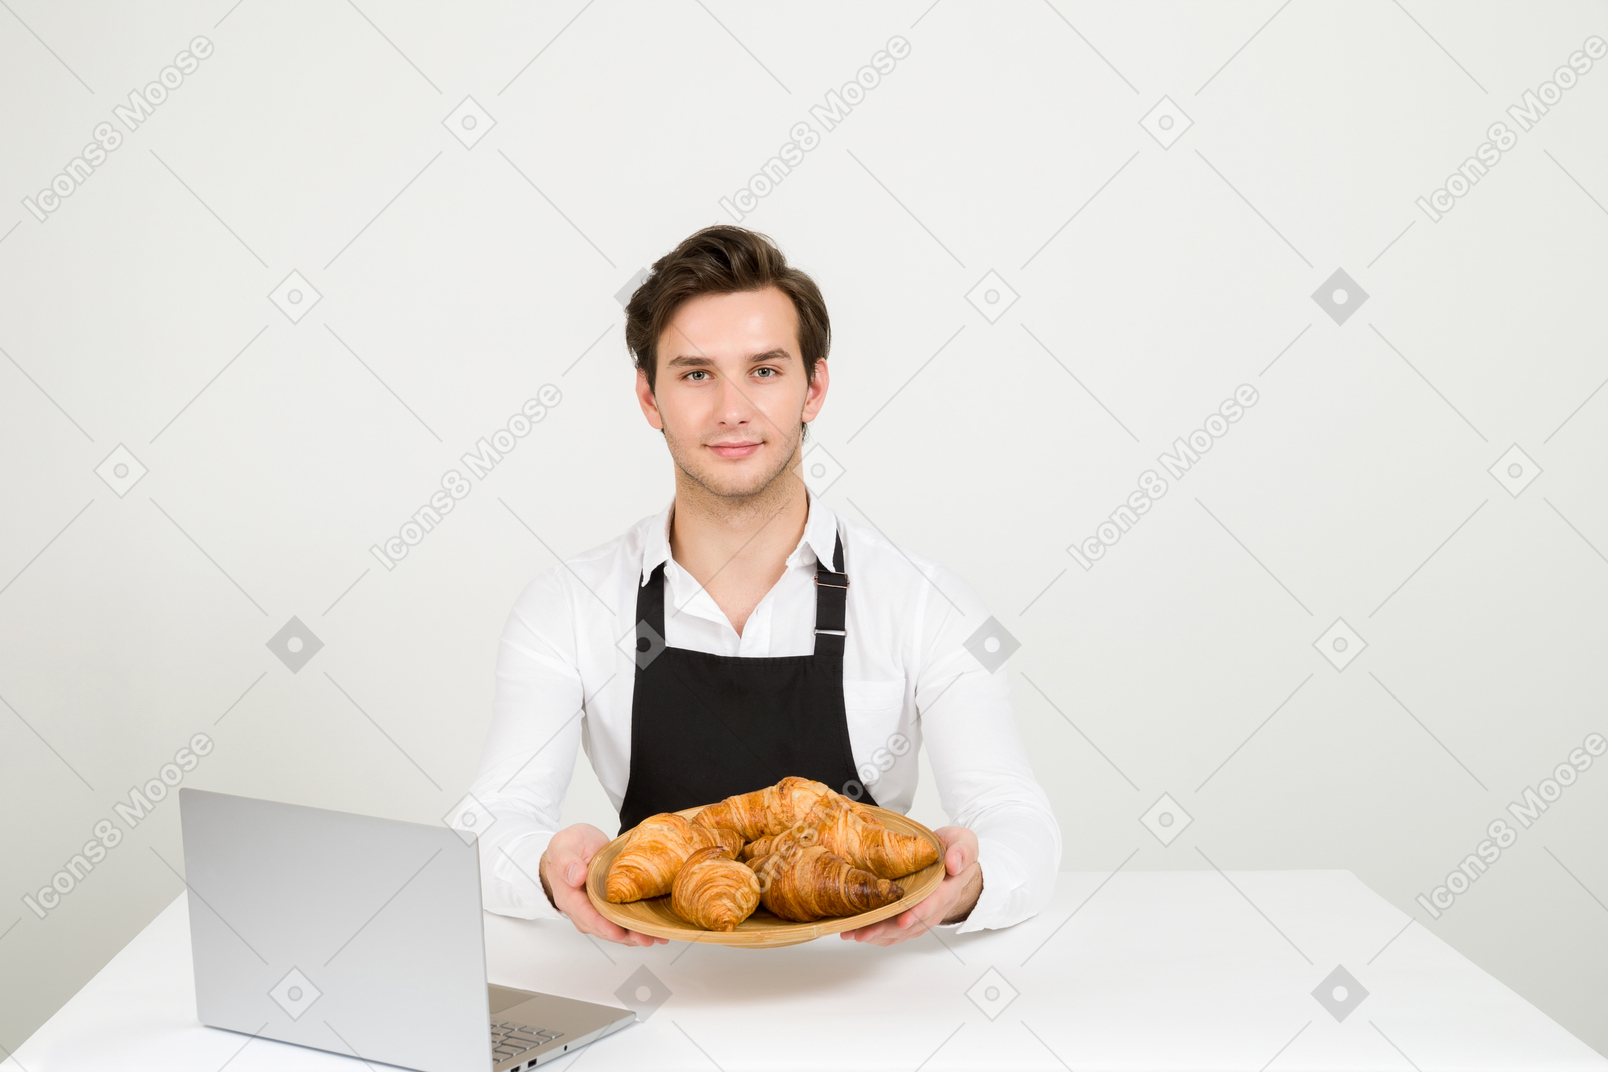 Young baker holding plate of croissants in front of laptop